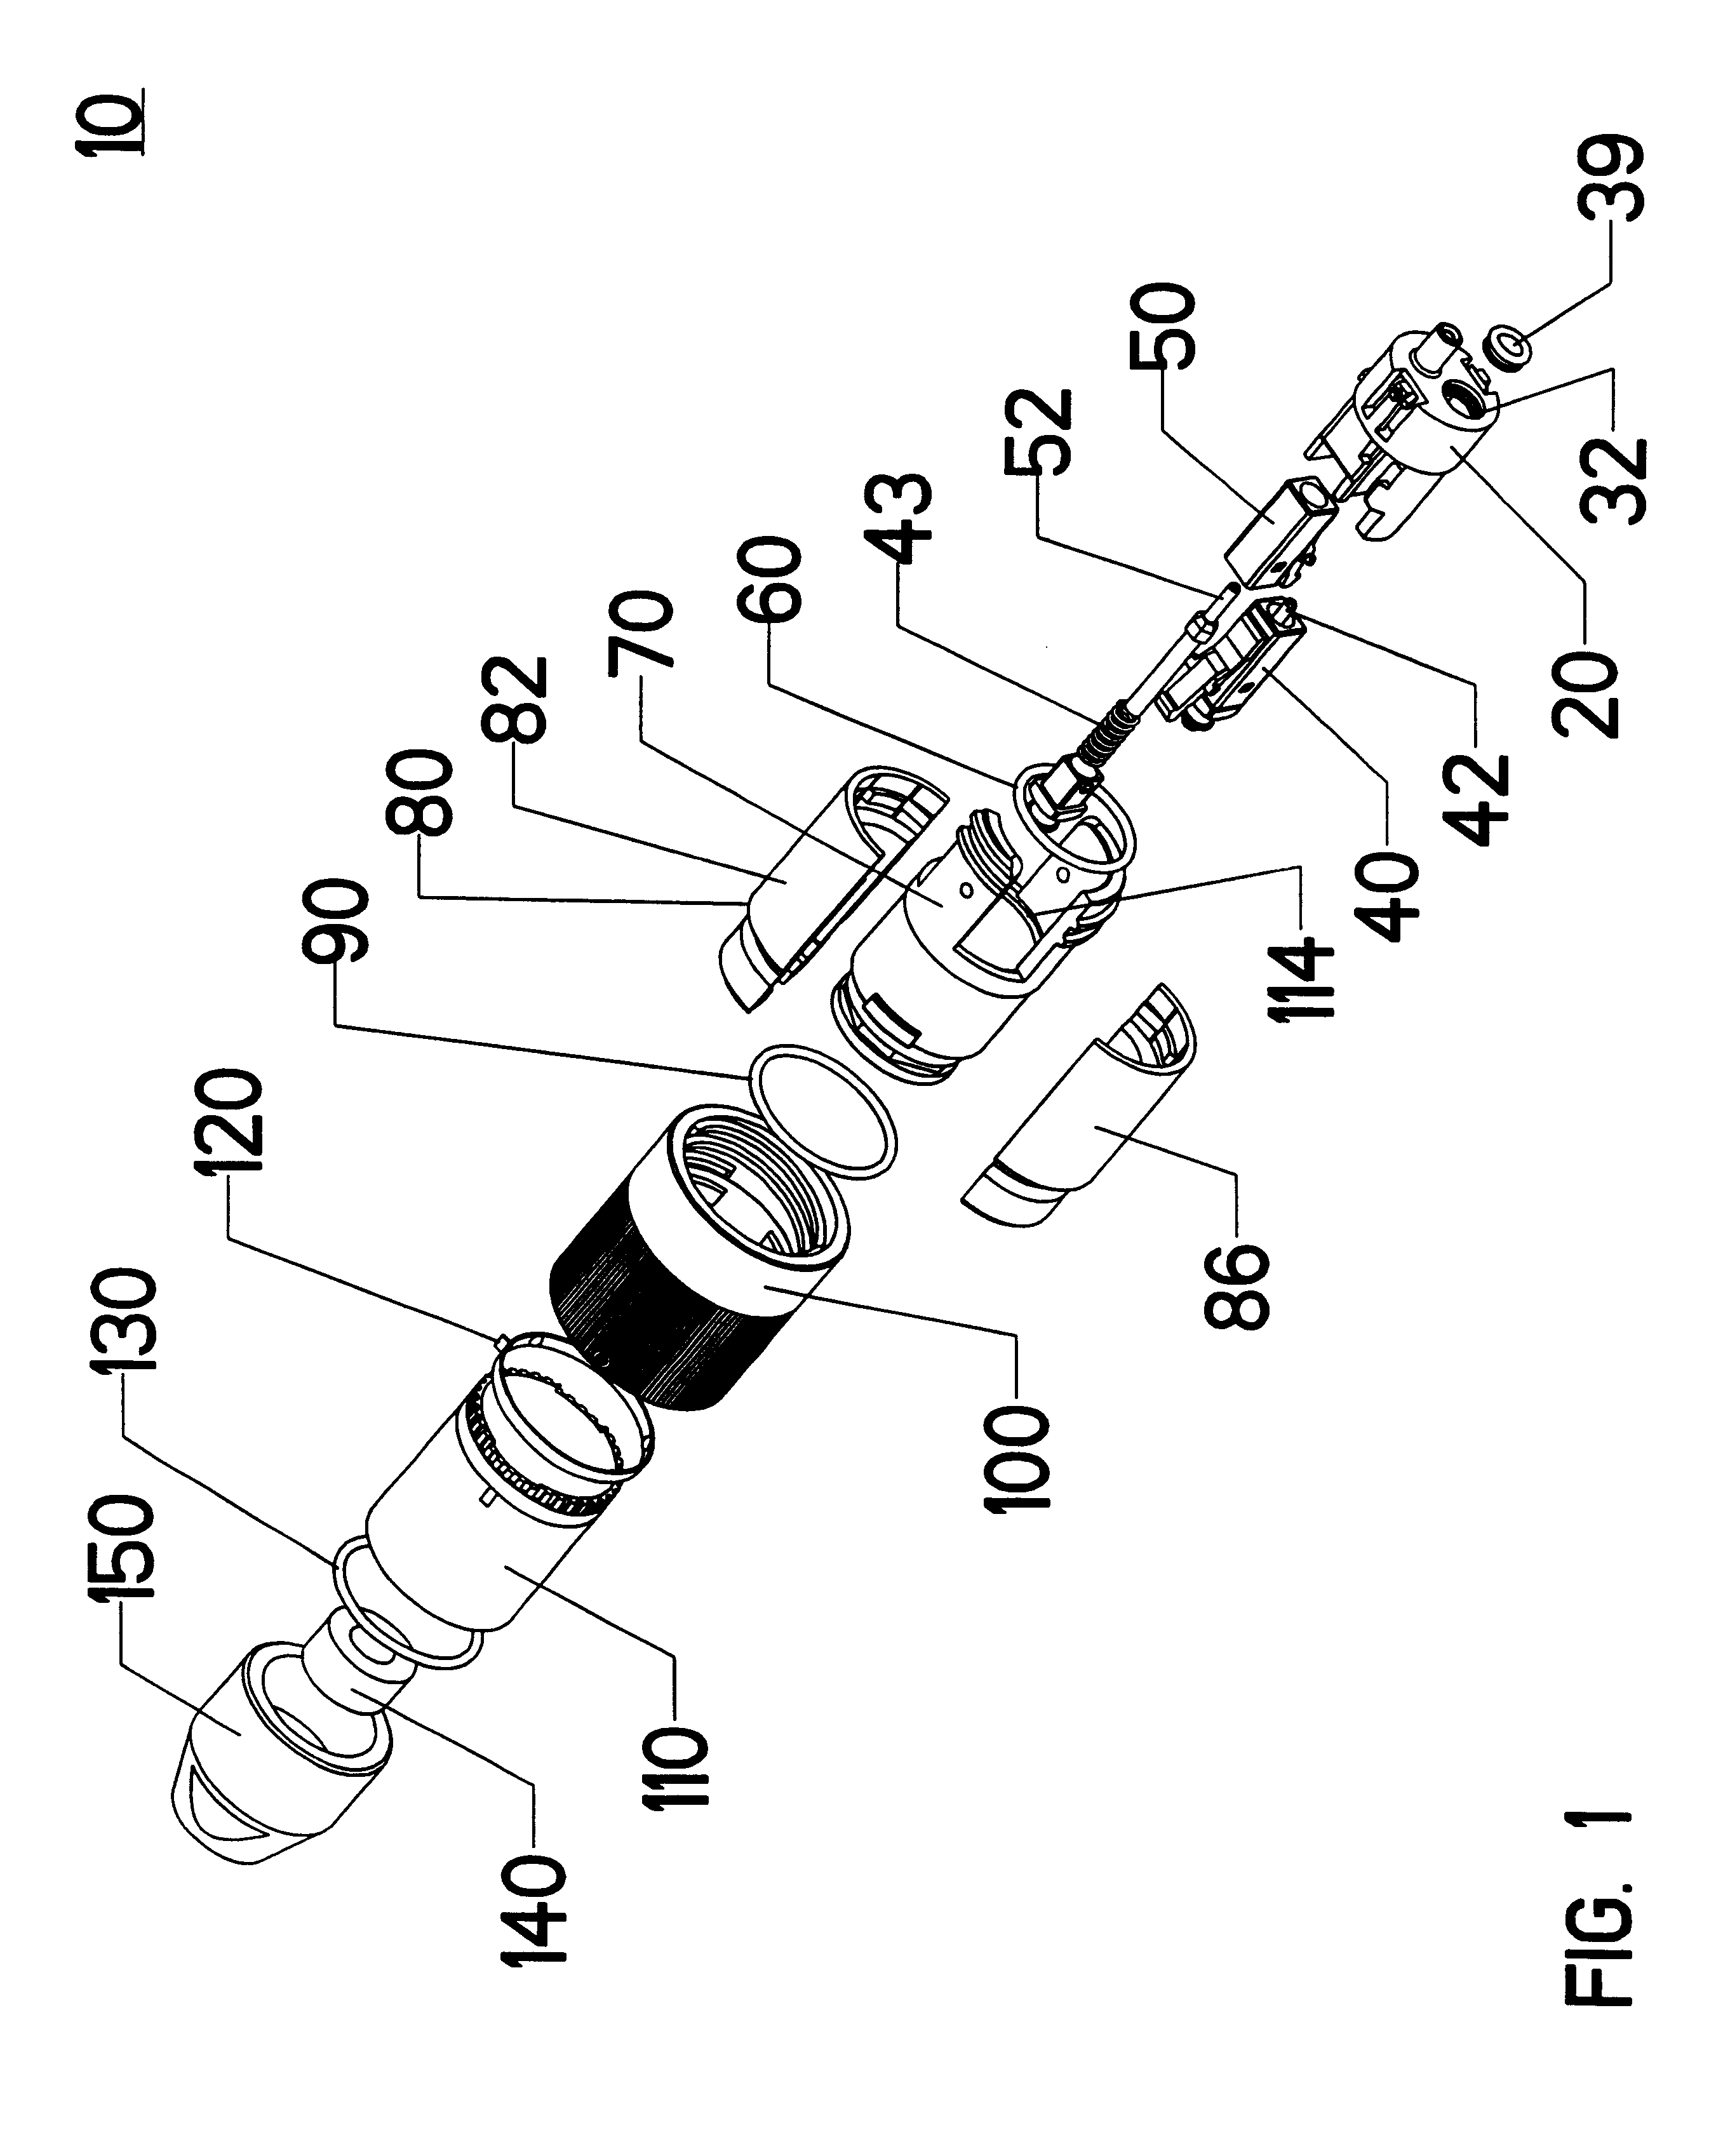 Field repairable hermaphroditic connector